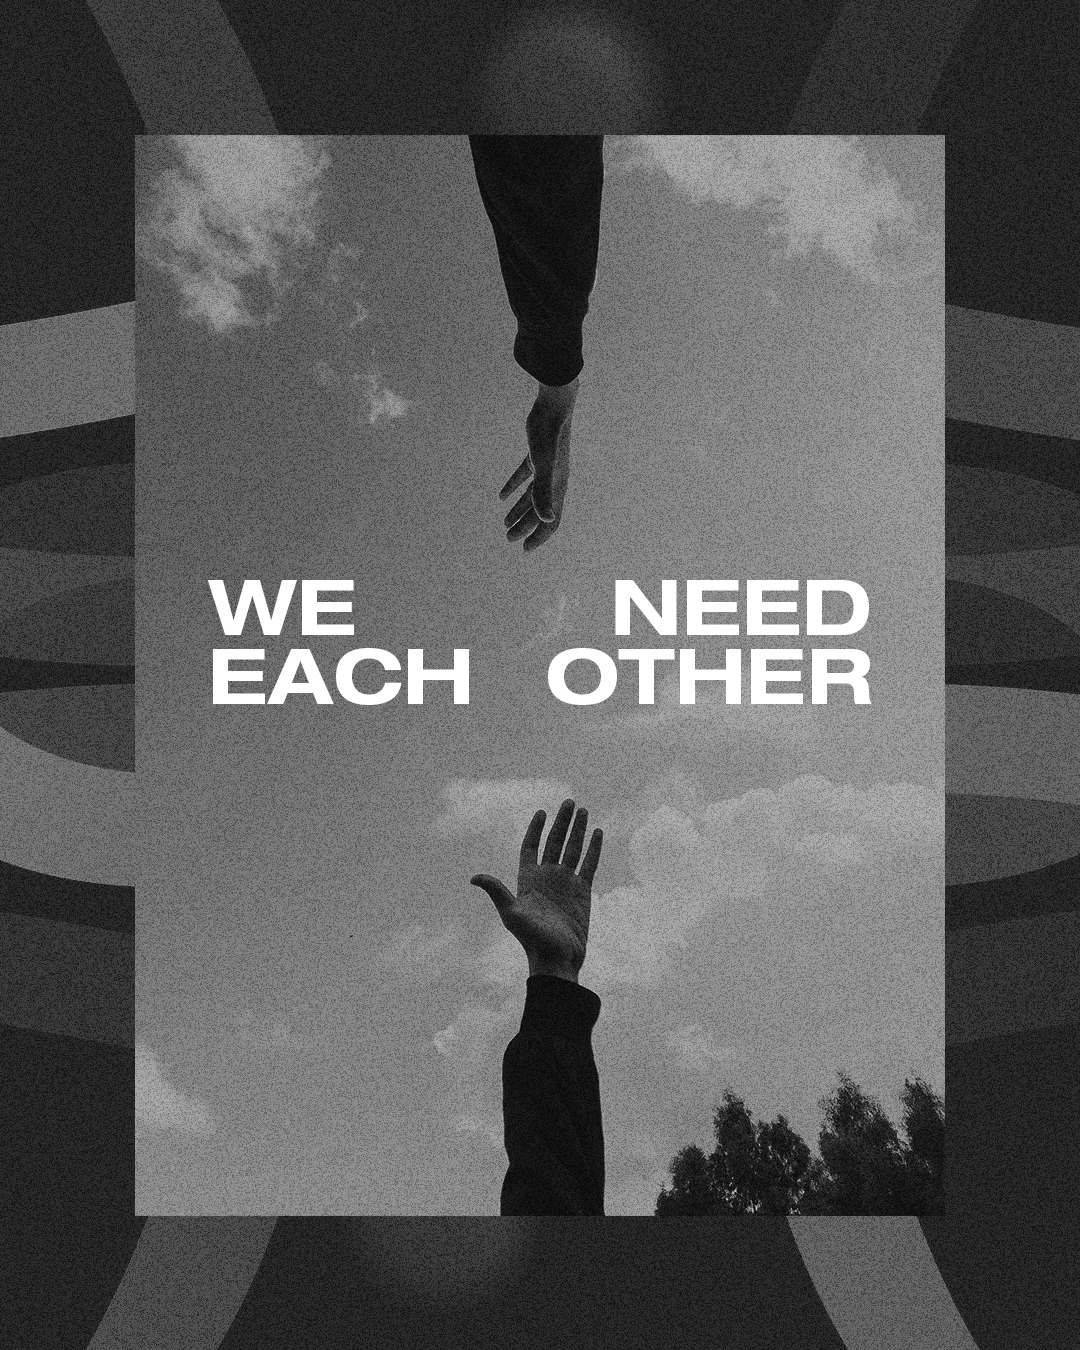 We need each other